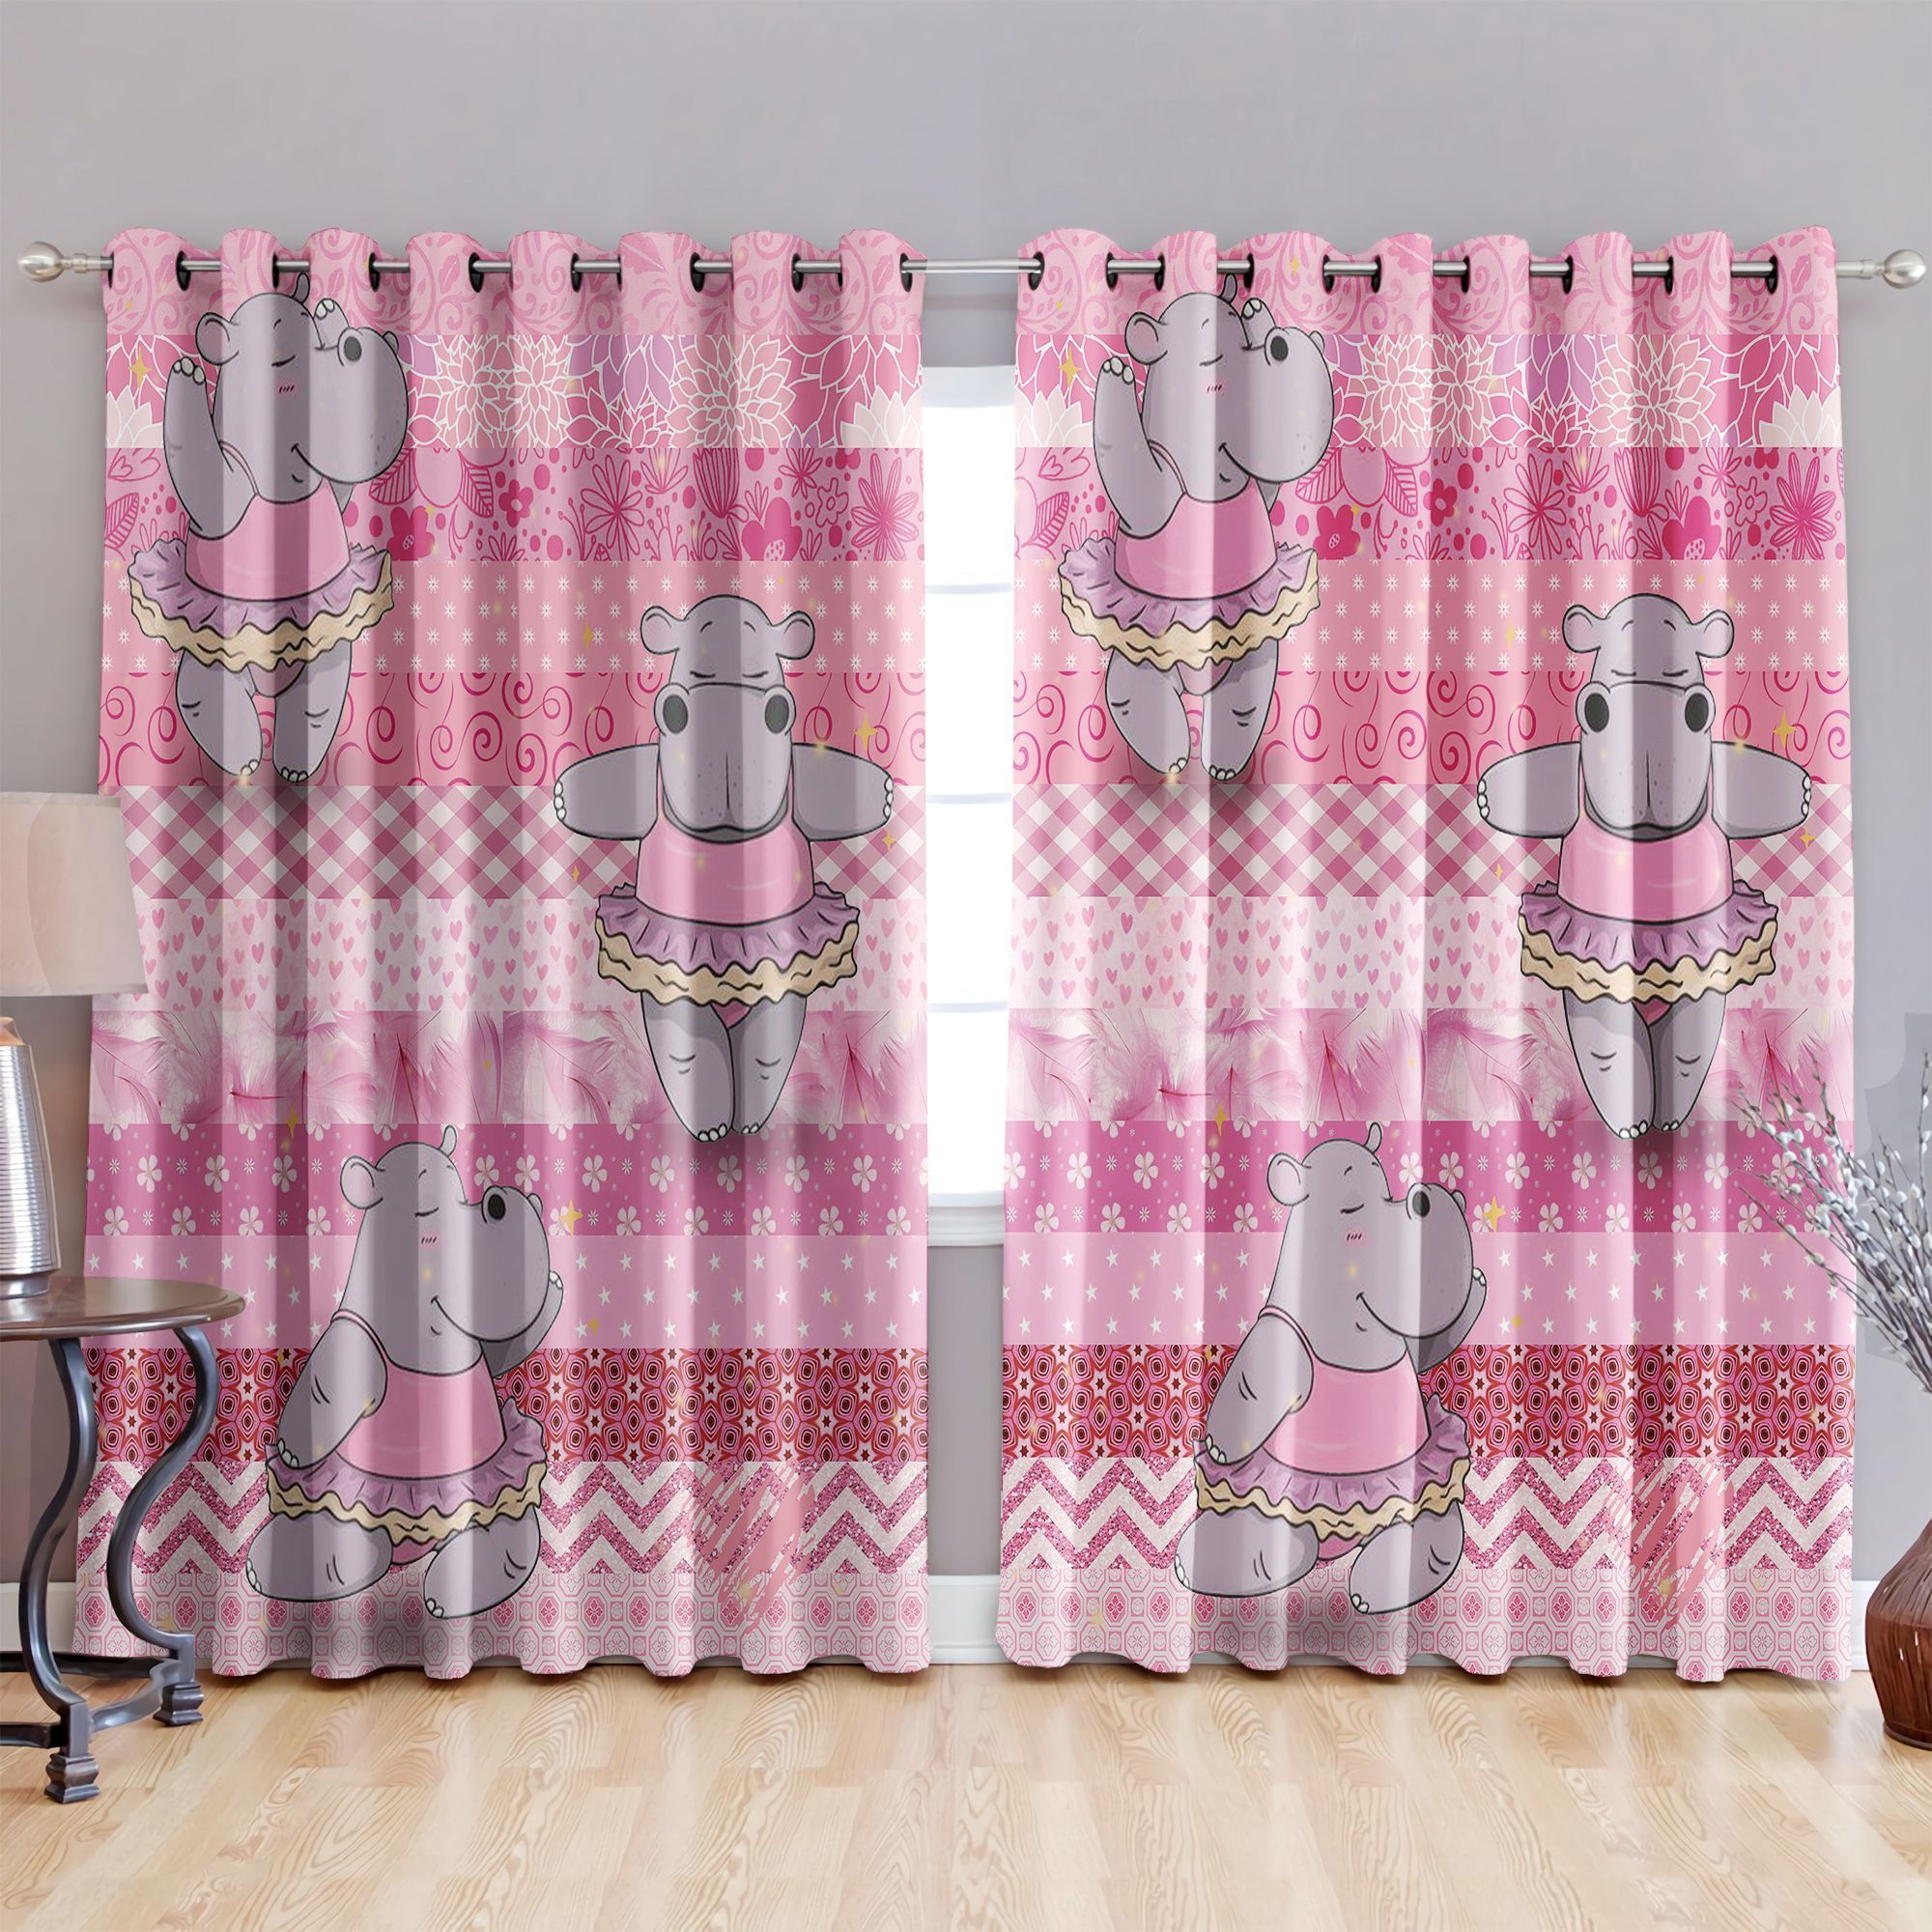 Hippo Pink And White Zigzag Printed Window Curtain Home Decor